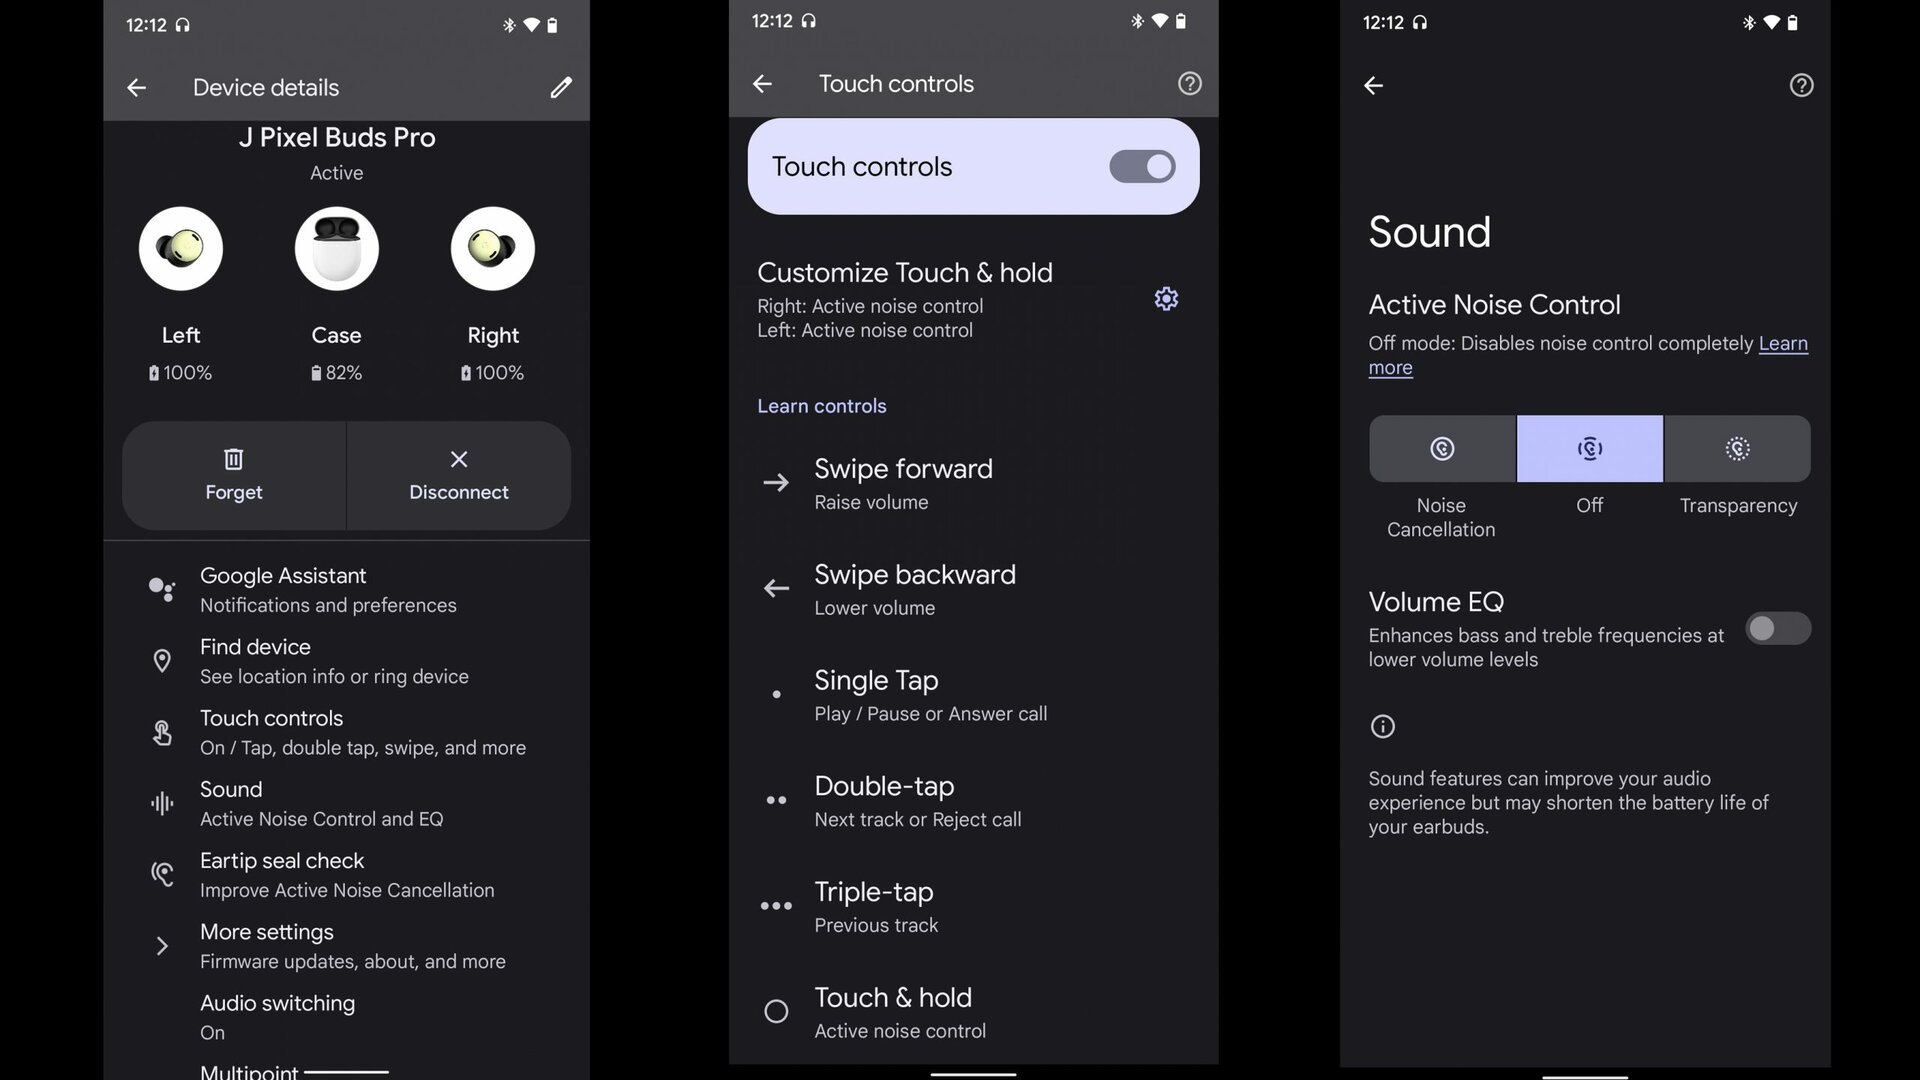 Three screenshots of the Google Pixel Buds Pro settings app showing, from left to right, the "Device details" page the "Touch controls" page, and the "Sound" settings page.